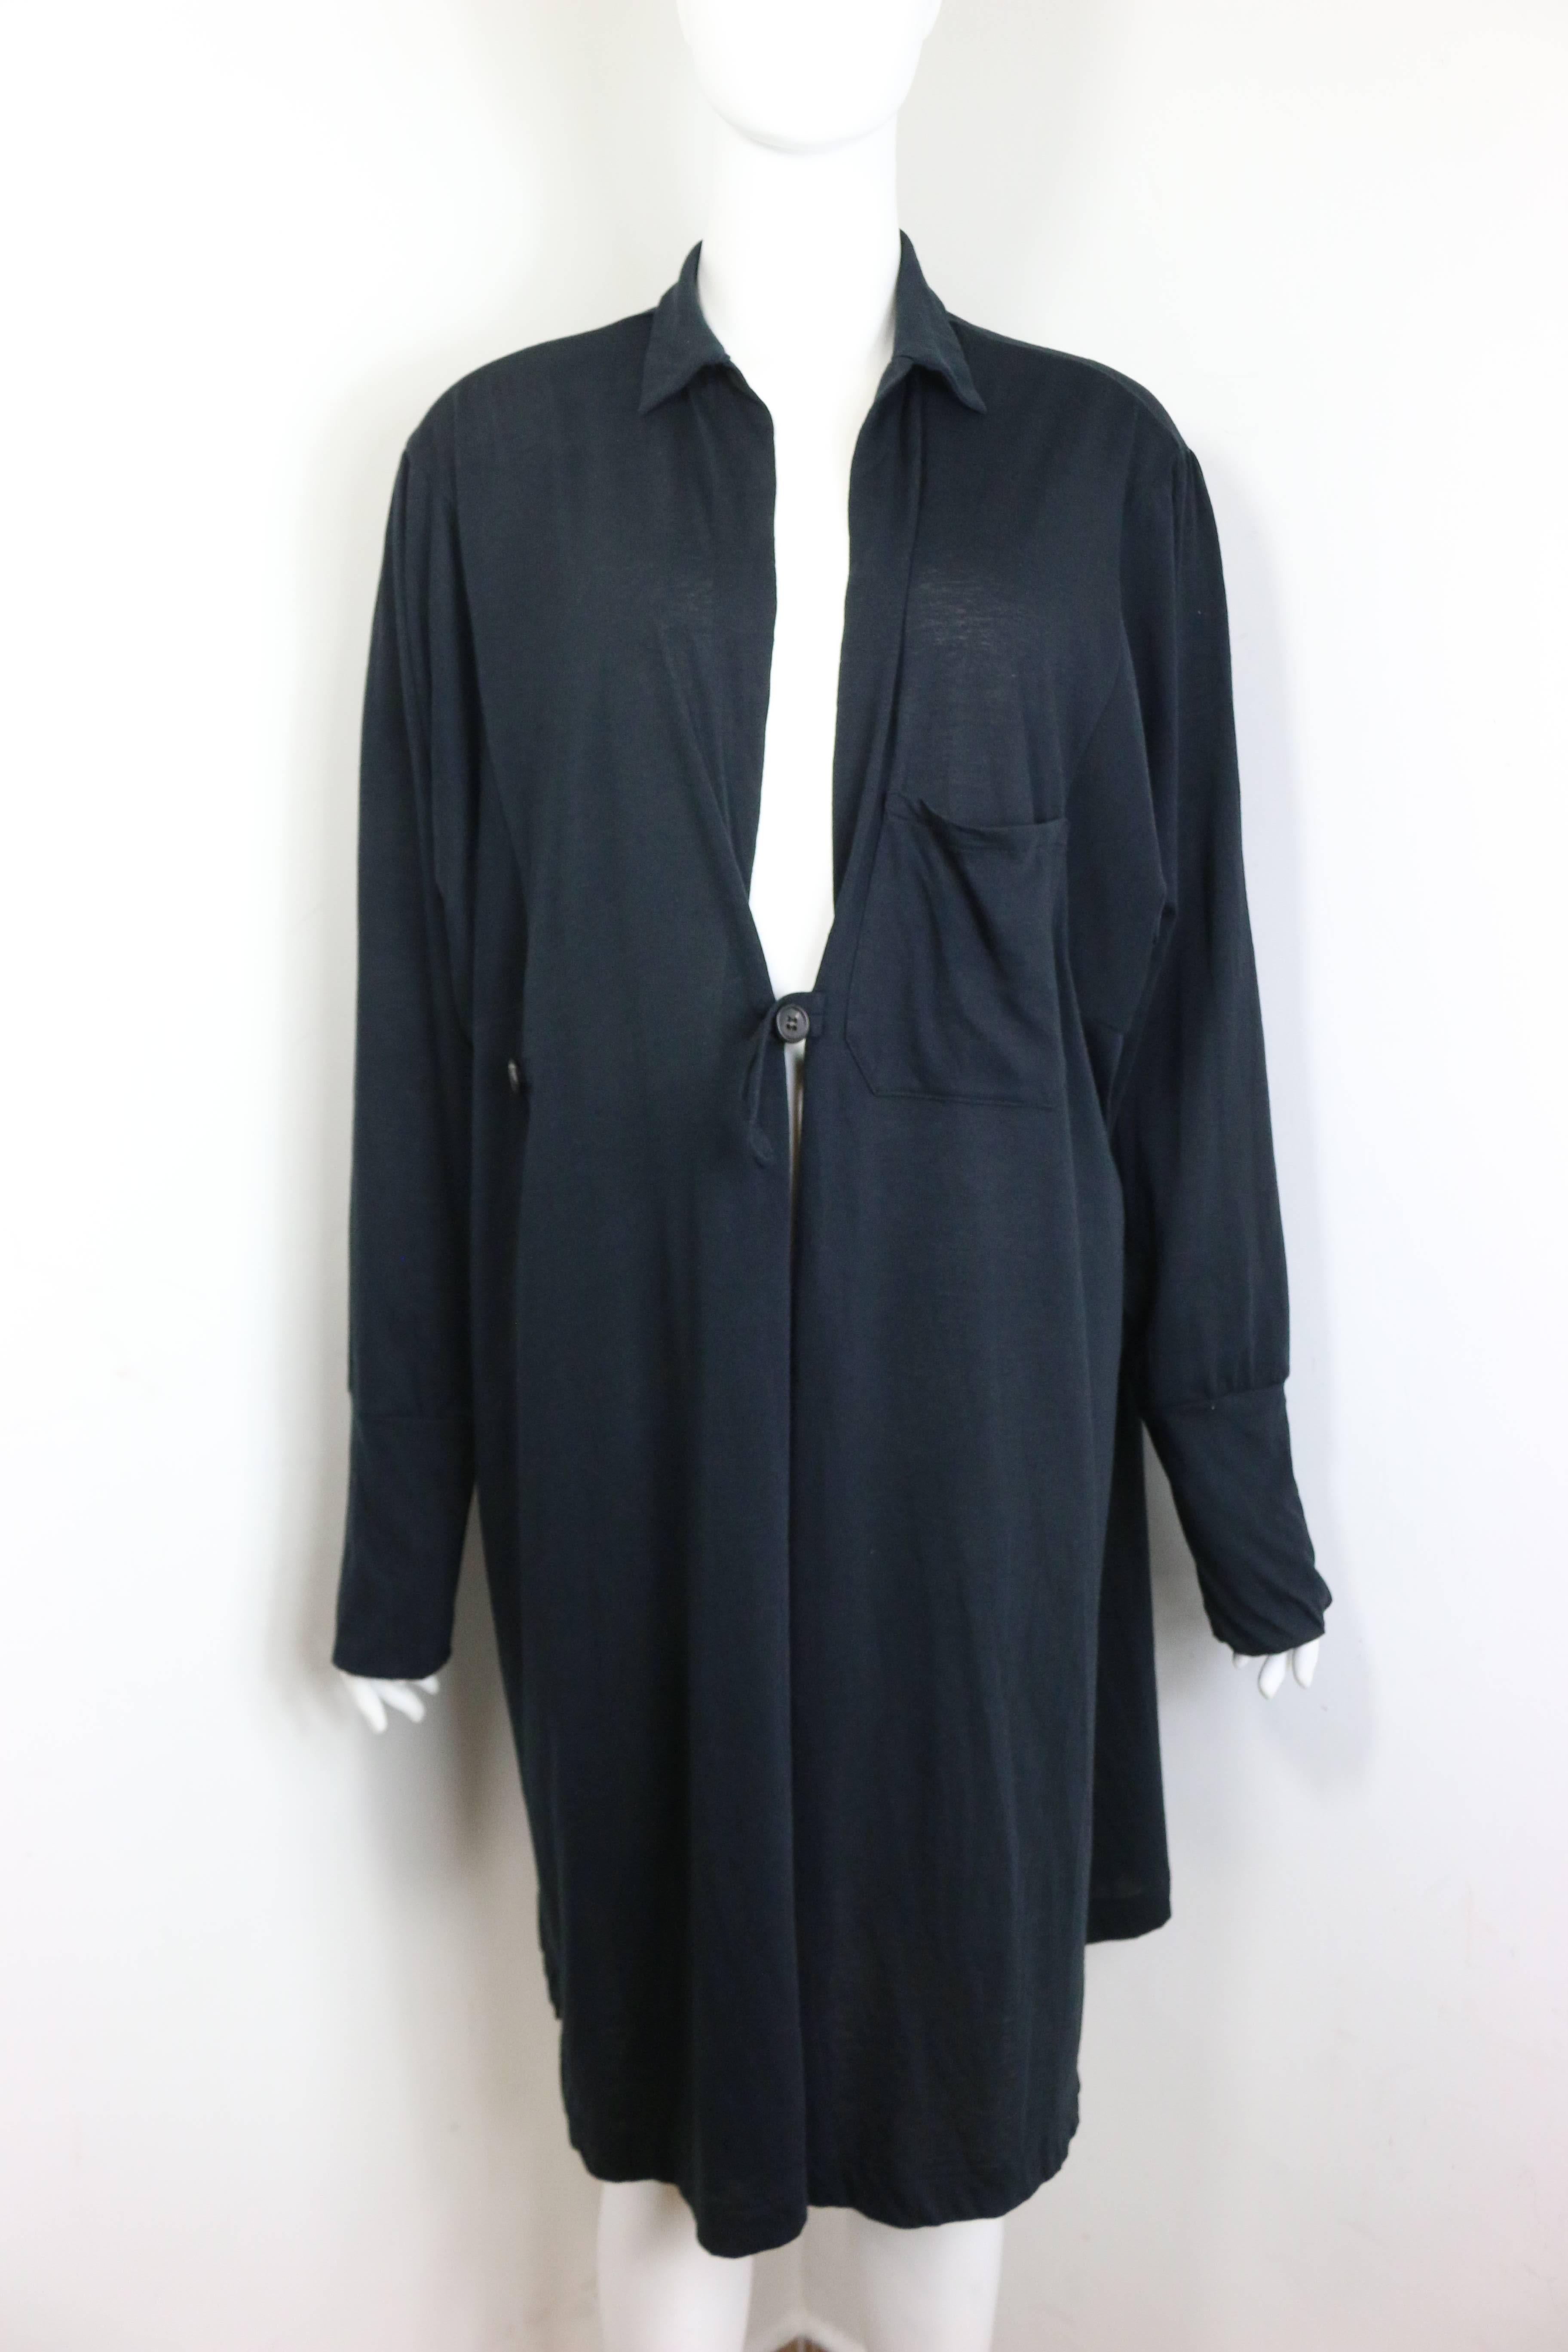 - Y's by Yohji Yamamoto black long cotton coat. Featuring a front open pocket and two buttons closure. Dark, black and long silhouette are always the signature of master Yohji. 

- Made in Japan. 

- Size 2. 

- 65% Polyester, 35% Cotton. 

